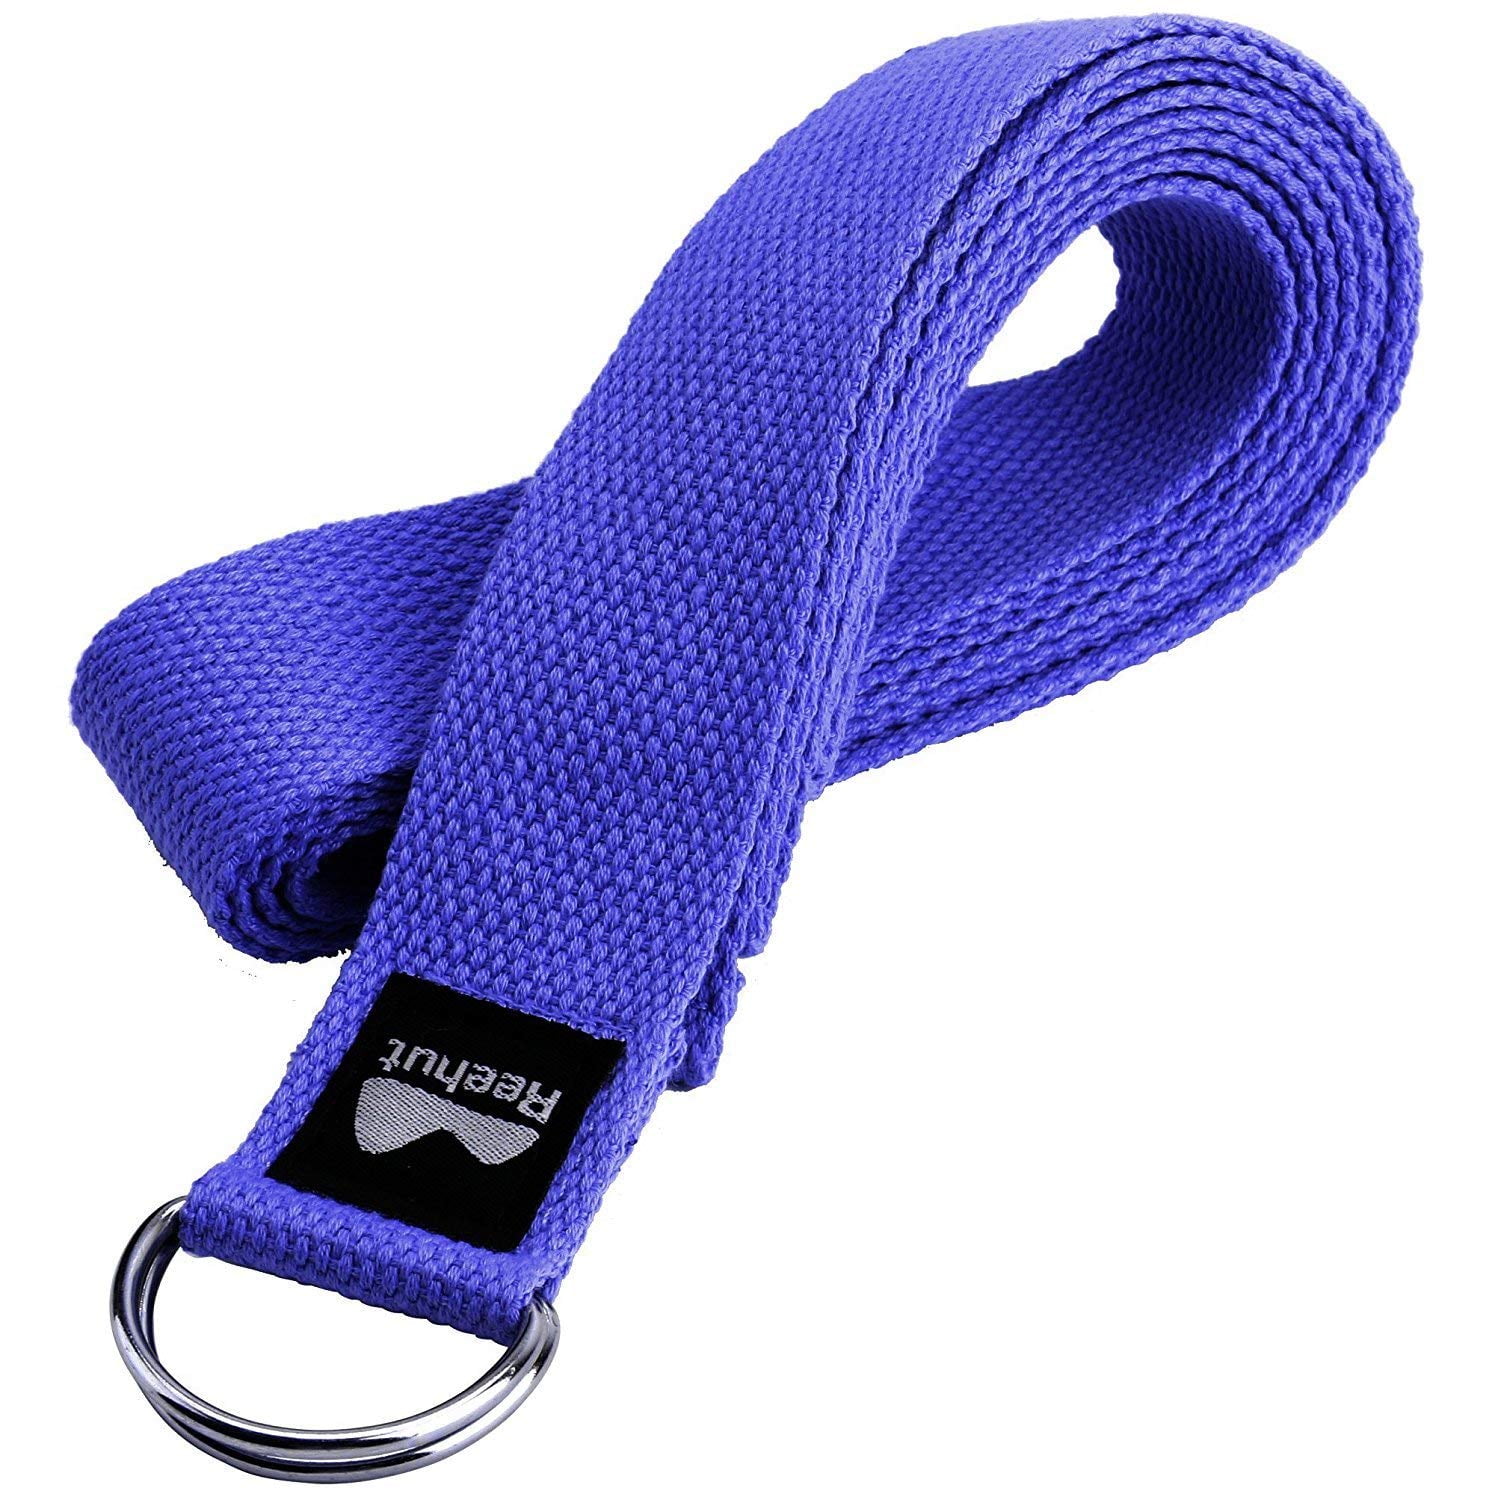 Reehut Fitness Exercise Yoga Strap w/ Adjustable D-Ring Buckle for  Stretching, Flexibility and Physical Therapy - (Purple, 6ft) 